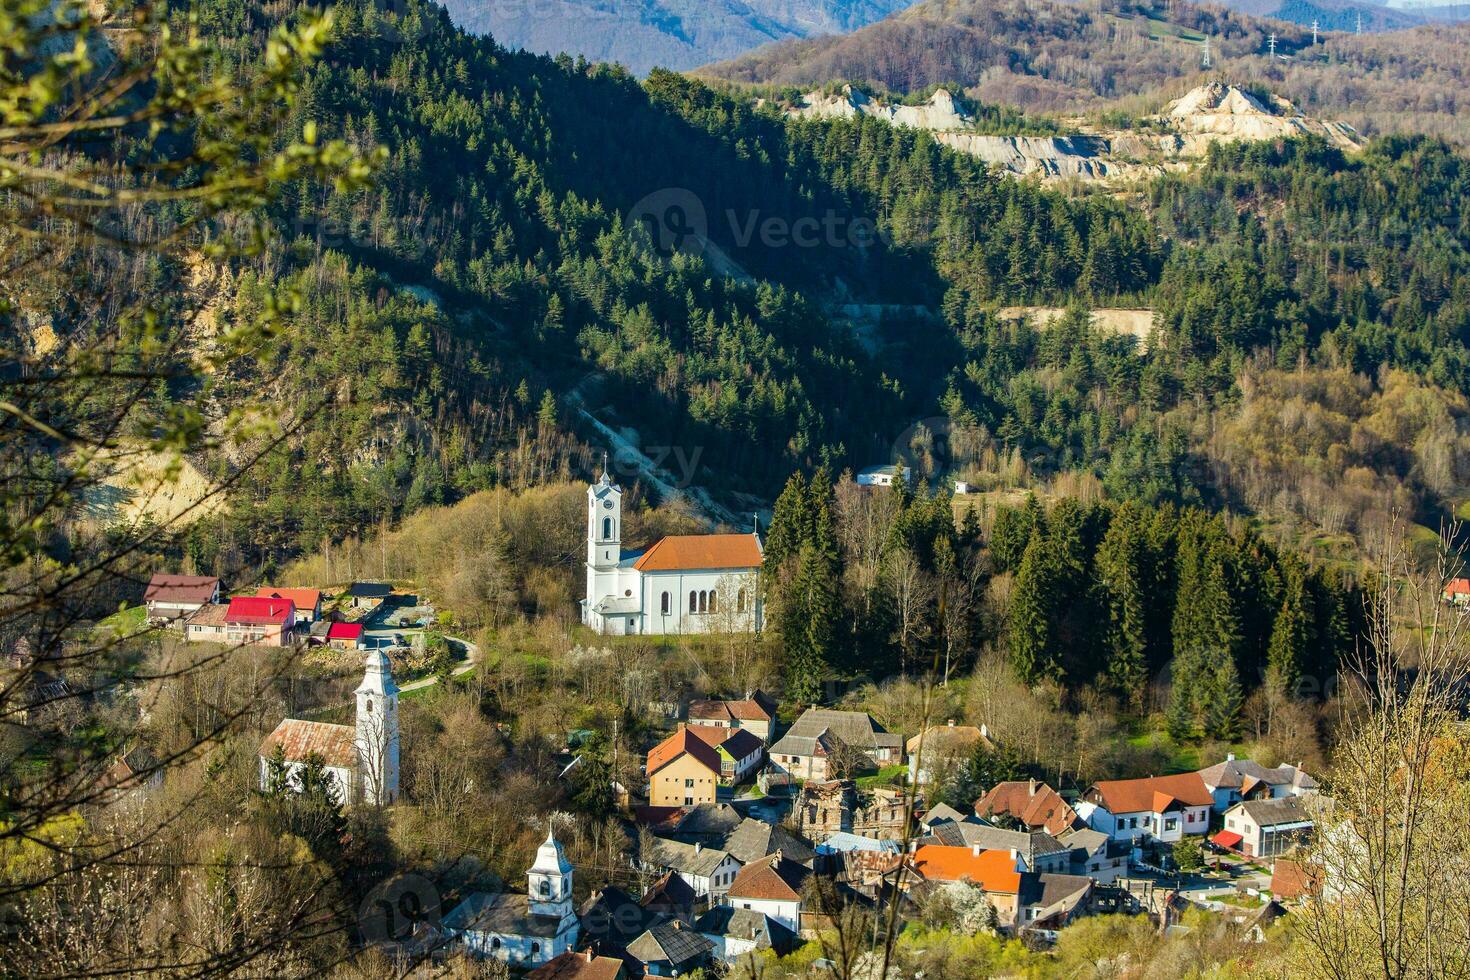 Rosia Montana, a beautiful old village in Transylvania. The first mining town in Romania that started extracting gold, iron, copper. photo